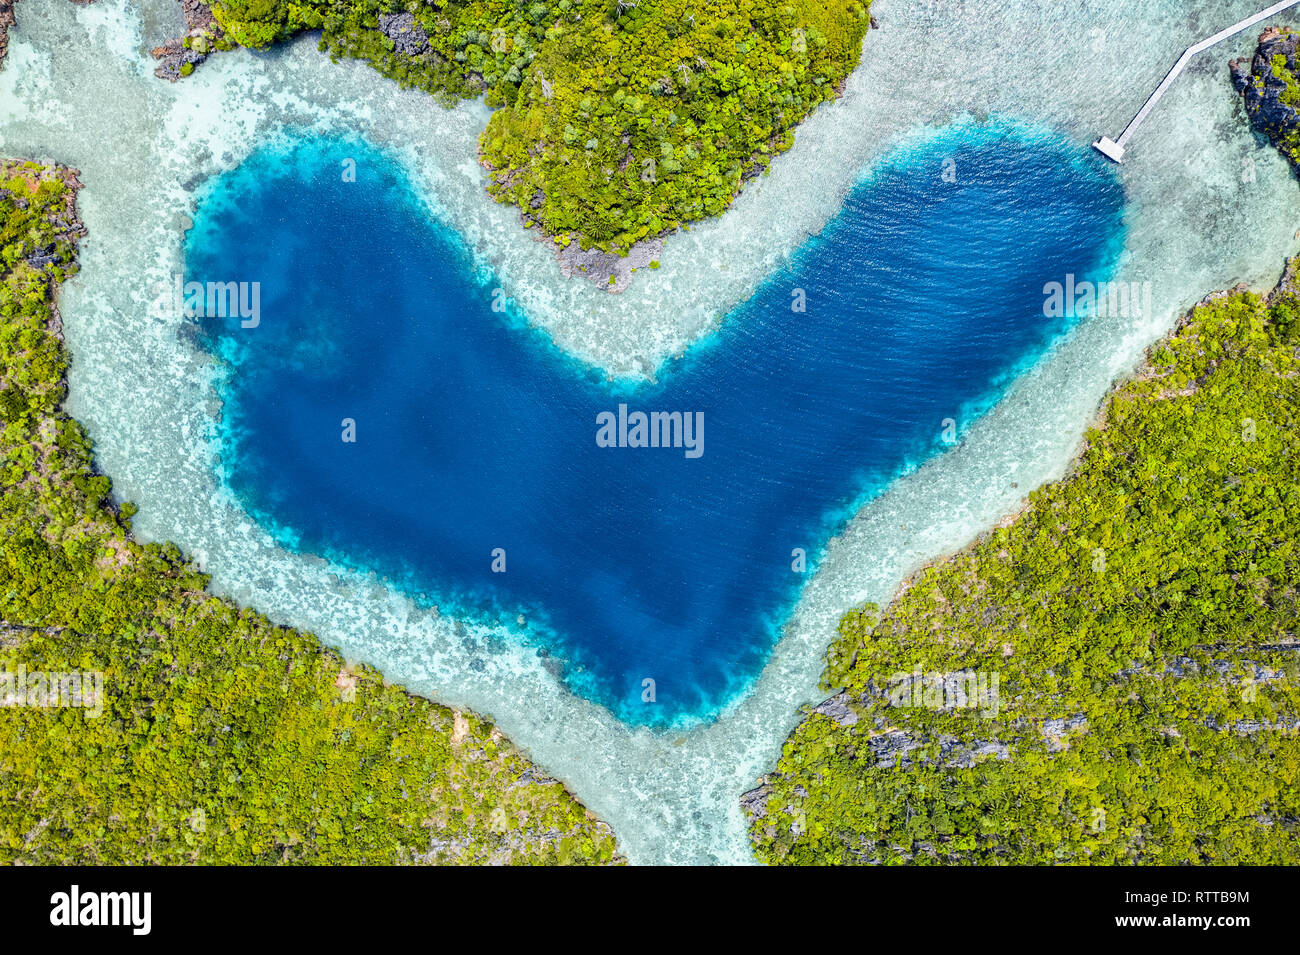 aerial view of a remote set of limestone islands with a heart-shaped, natural lagoon, Raja Ampat Islands, West Papua, Indonesia, Pacific Ocean Stock Photo